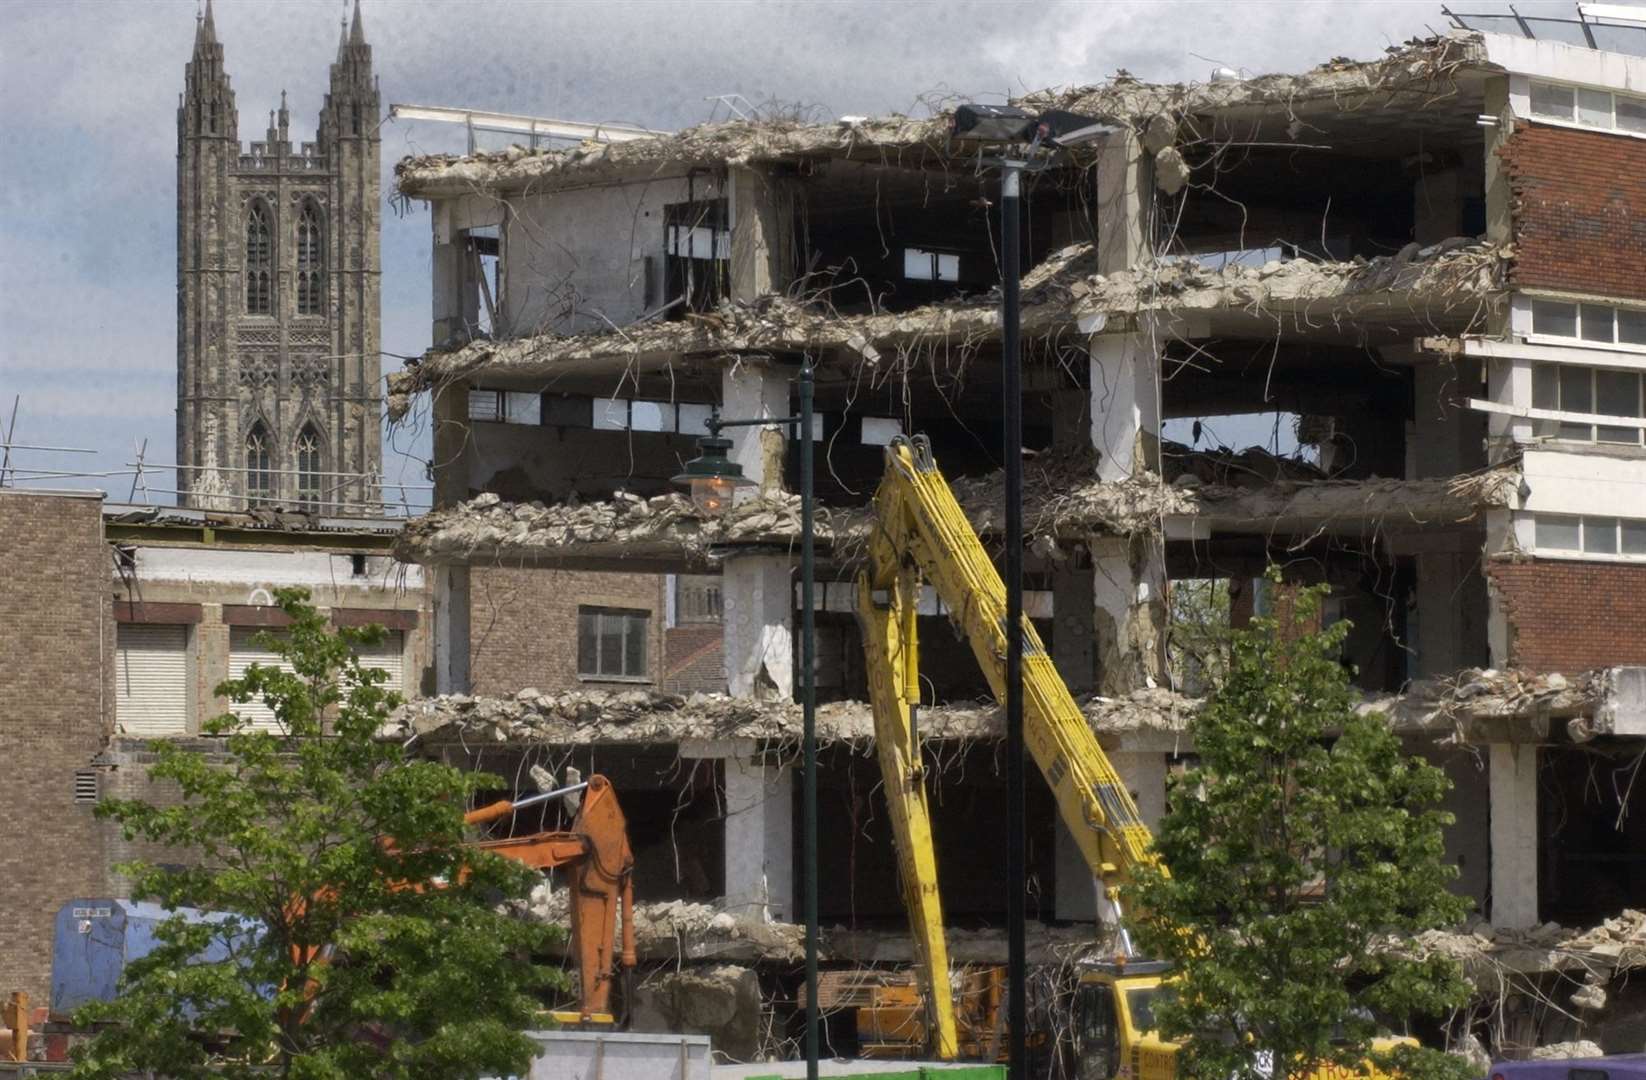 Ricemans is demolished, with the Cathedral in the background. Pic: Derek Stingemore